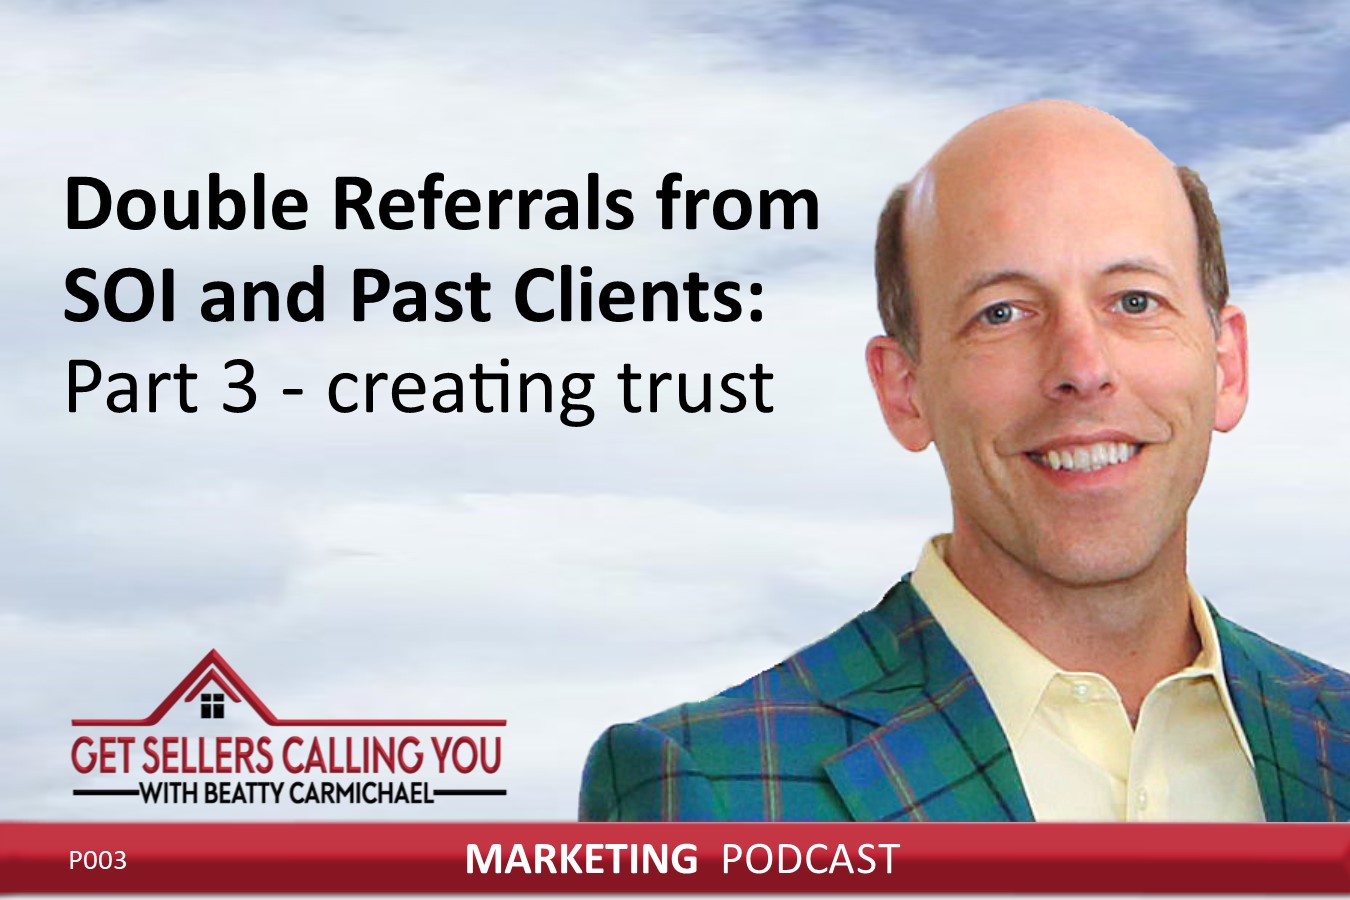 P003-Double-Referrals-from-SOI-and-Past-Clients-Part-3-creating-trust